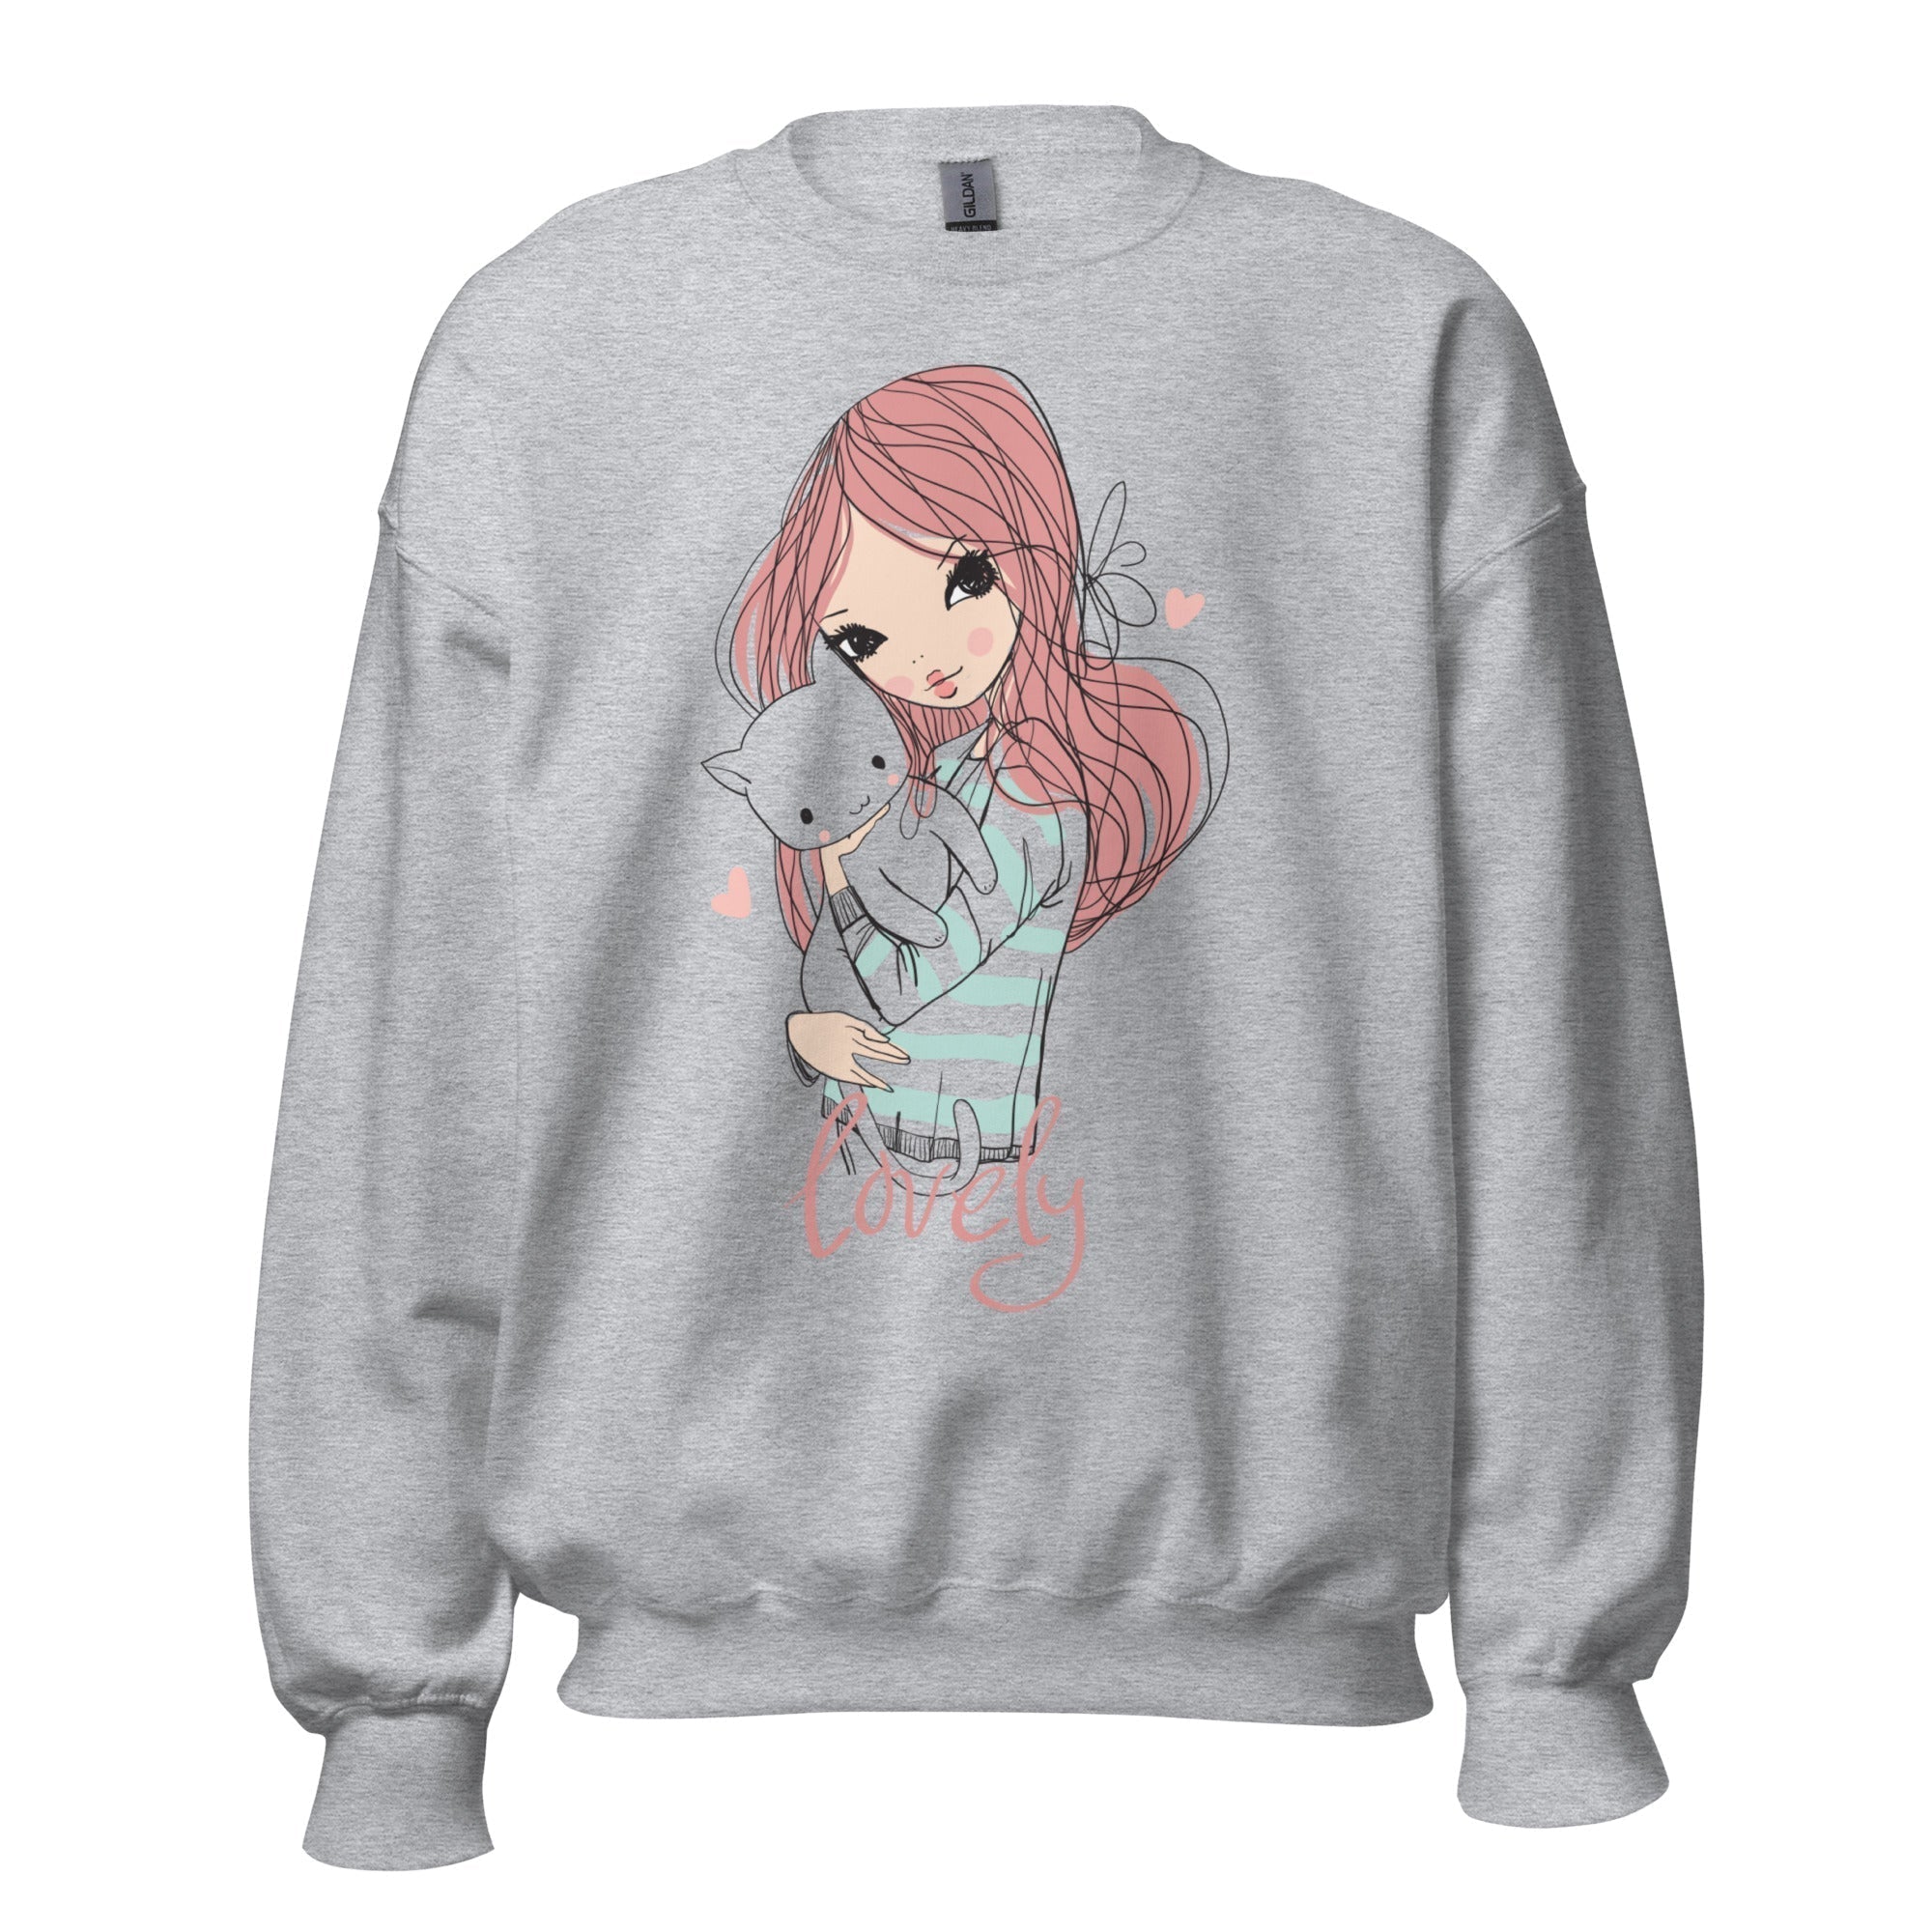 Women's Crew Neck Sweatshirt - Lovely Girl With Cat - GRAPHIC T-SHIRTS